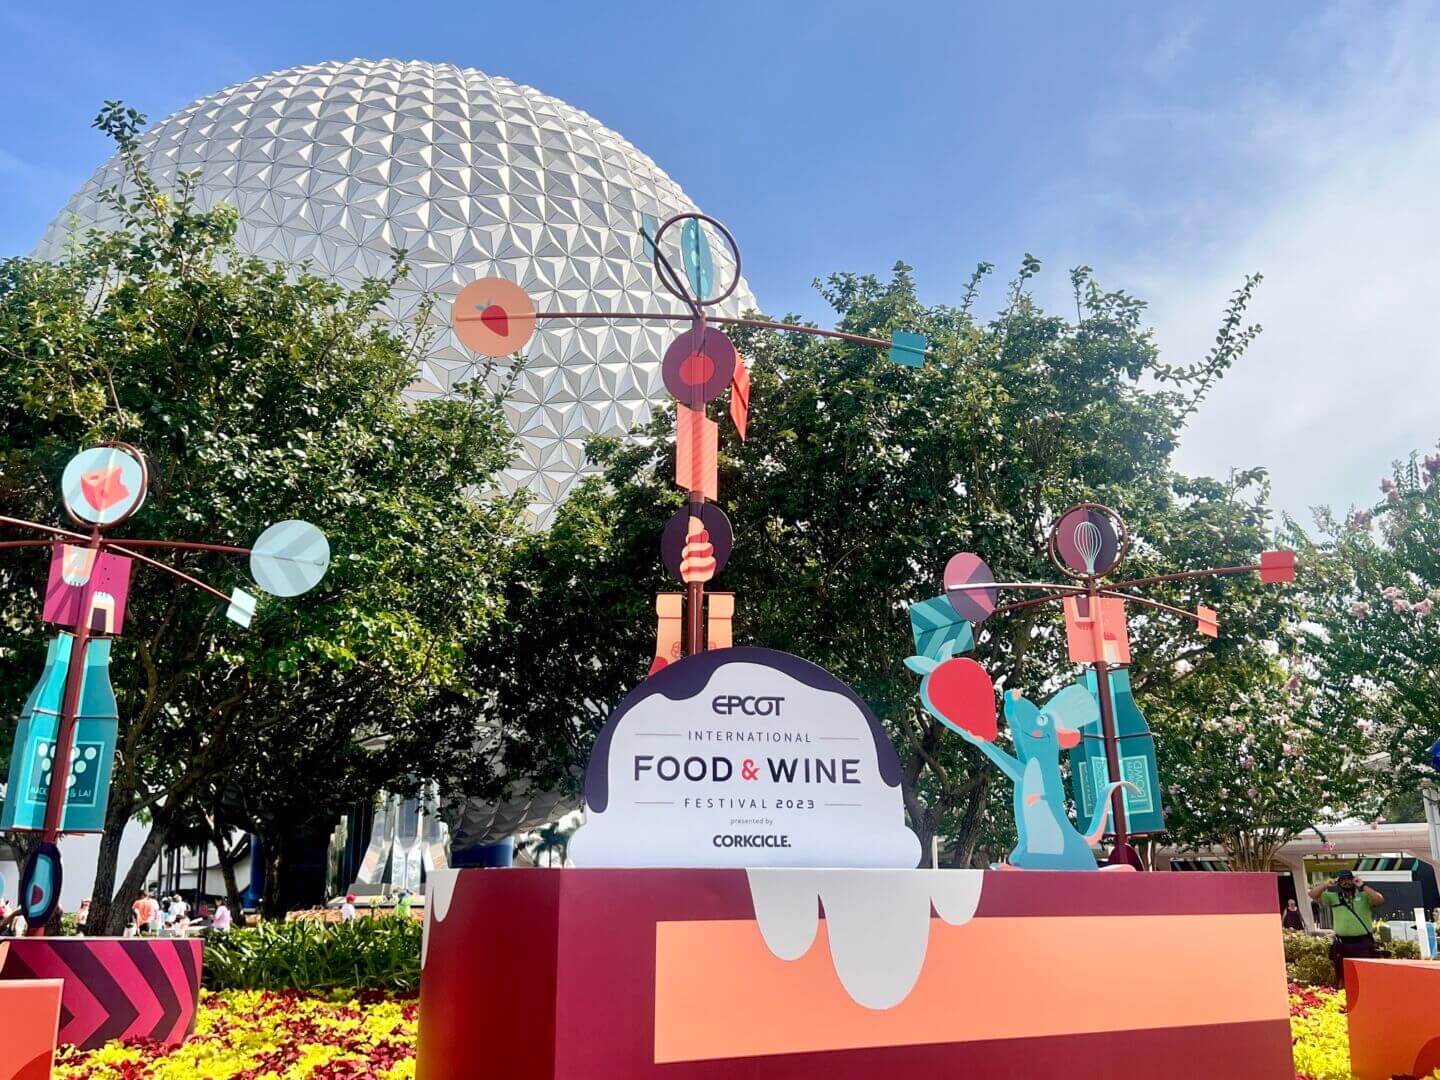 https://www.micechat.com/wp-content/uploads/2023/07/Photo_2-EPCOT-FOOD-AND-WINE-FESTIVAL-2023.jpg